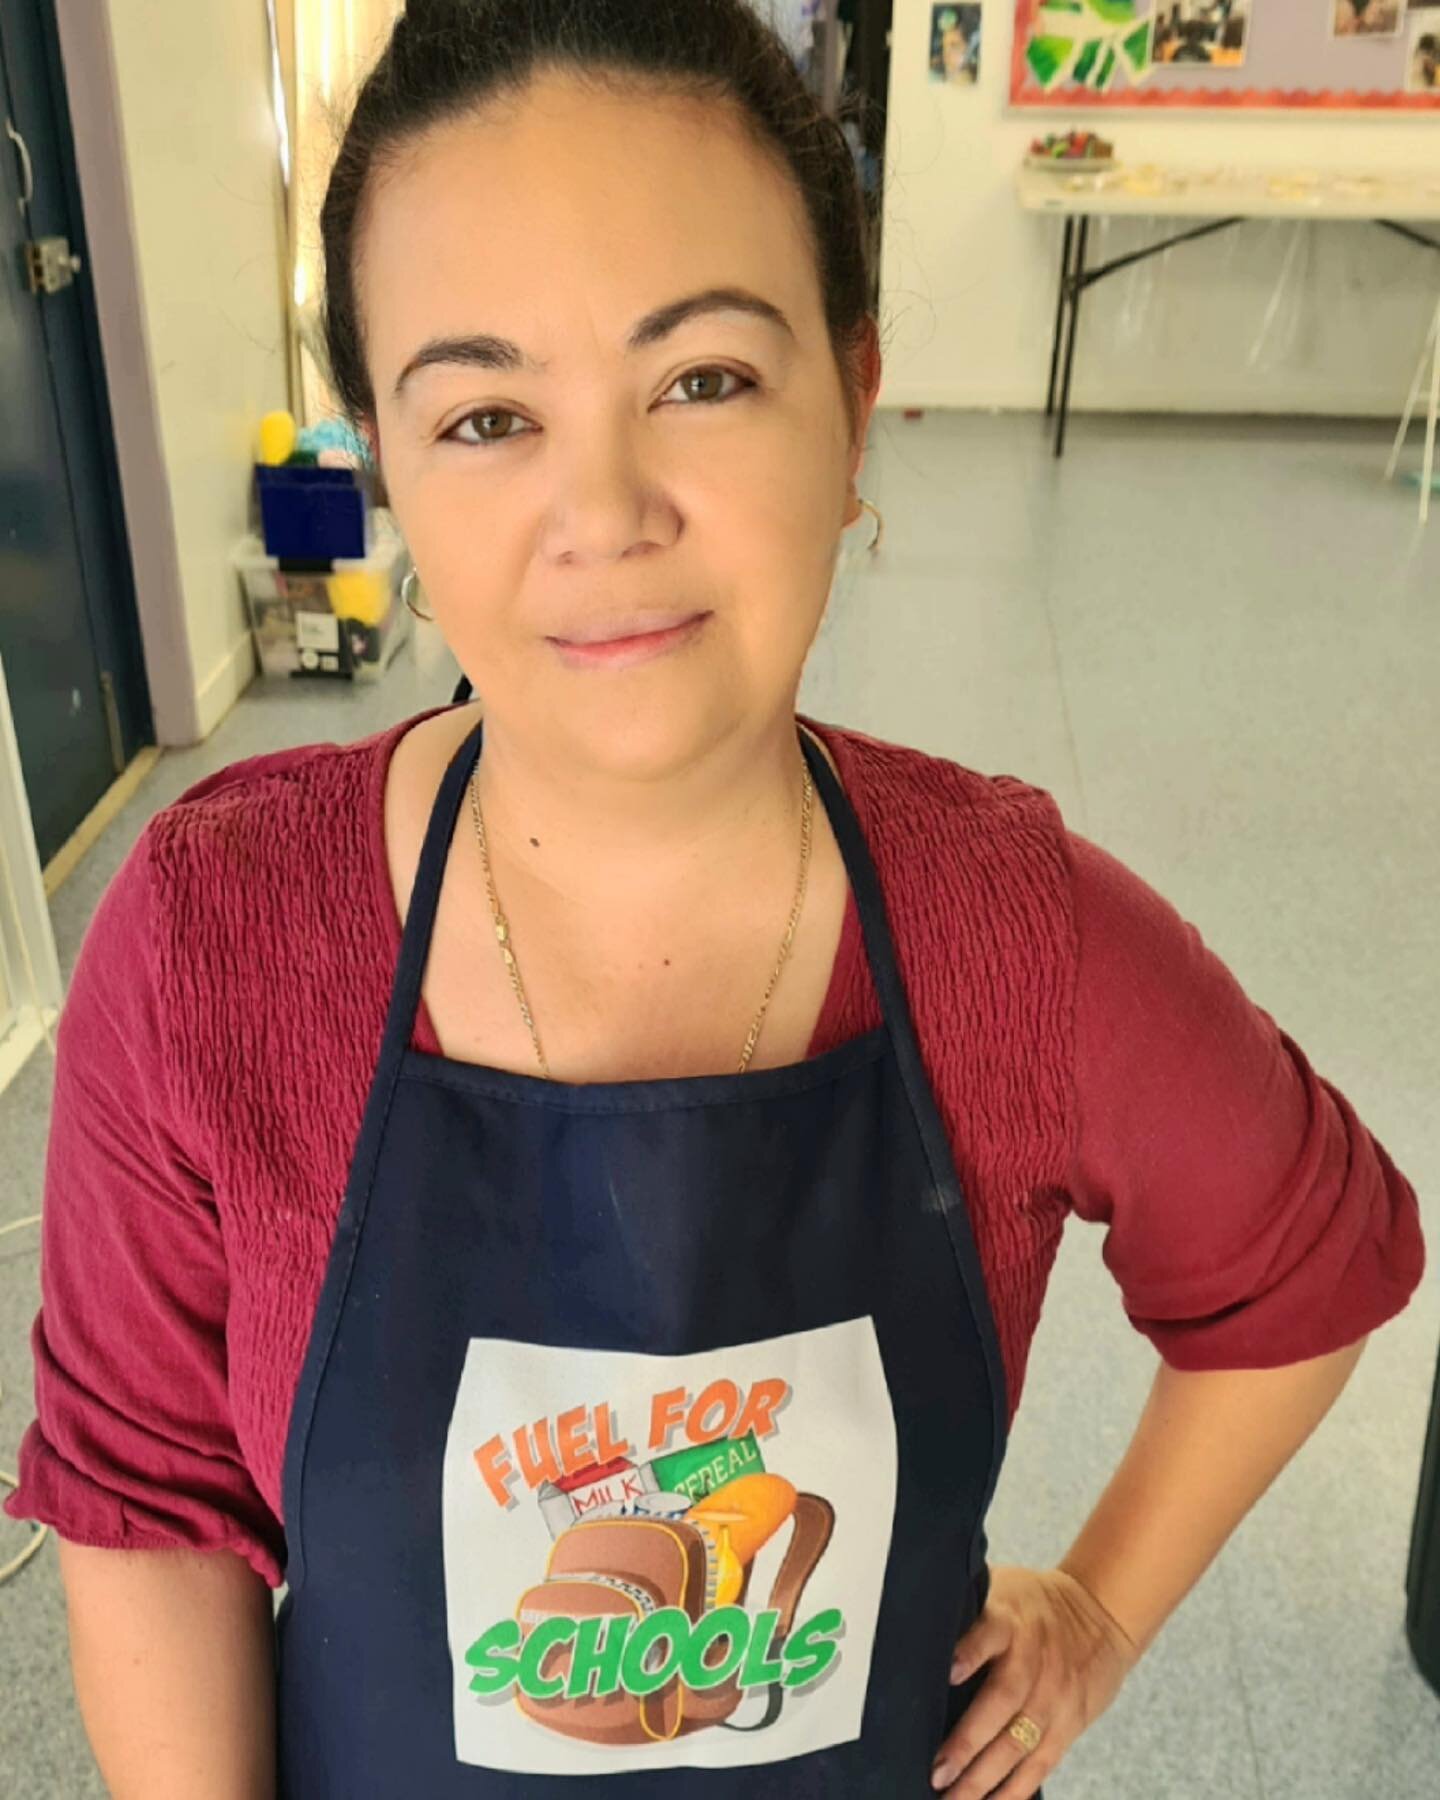 This is the amazing Majorie who runs the breakfast program at Heatley Primary School 

We started delivering our Fuel for Schools aprons this week across the city and they have been a hit with the breakfast coordinators !!

#Fuelforschools #supportlo